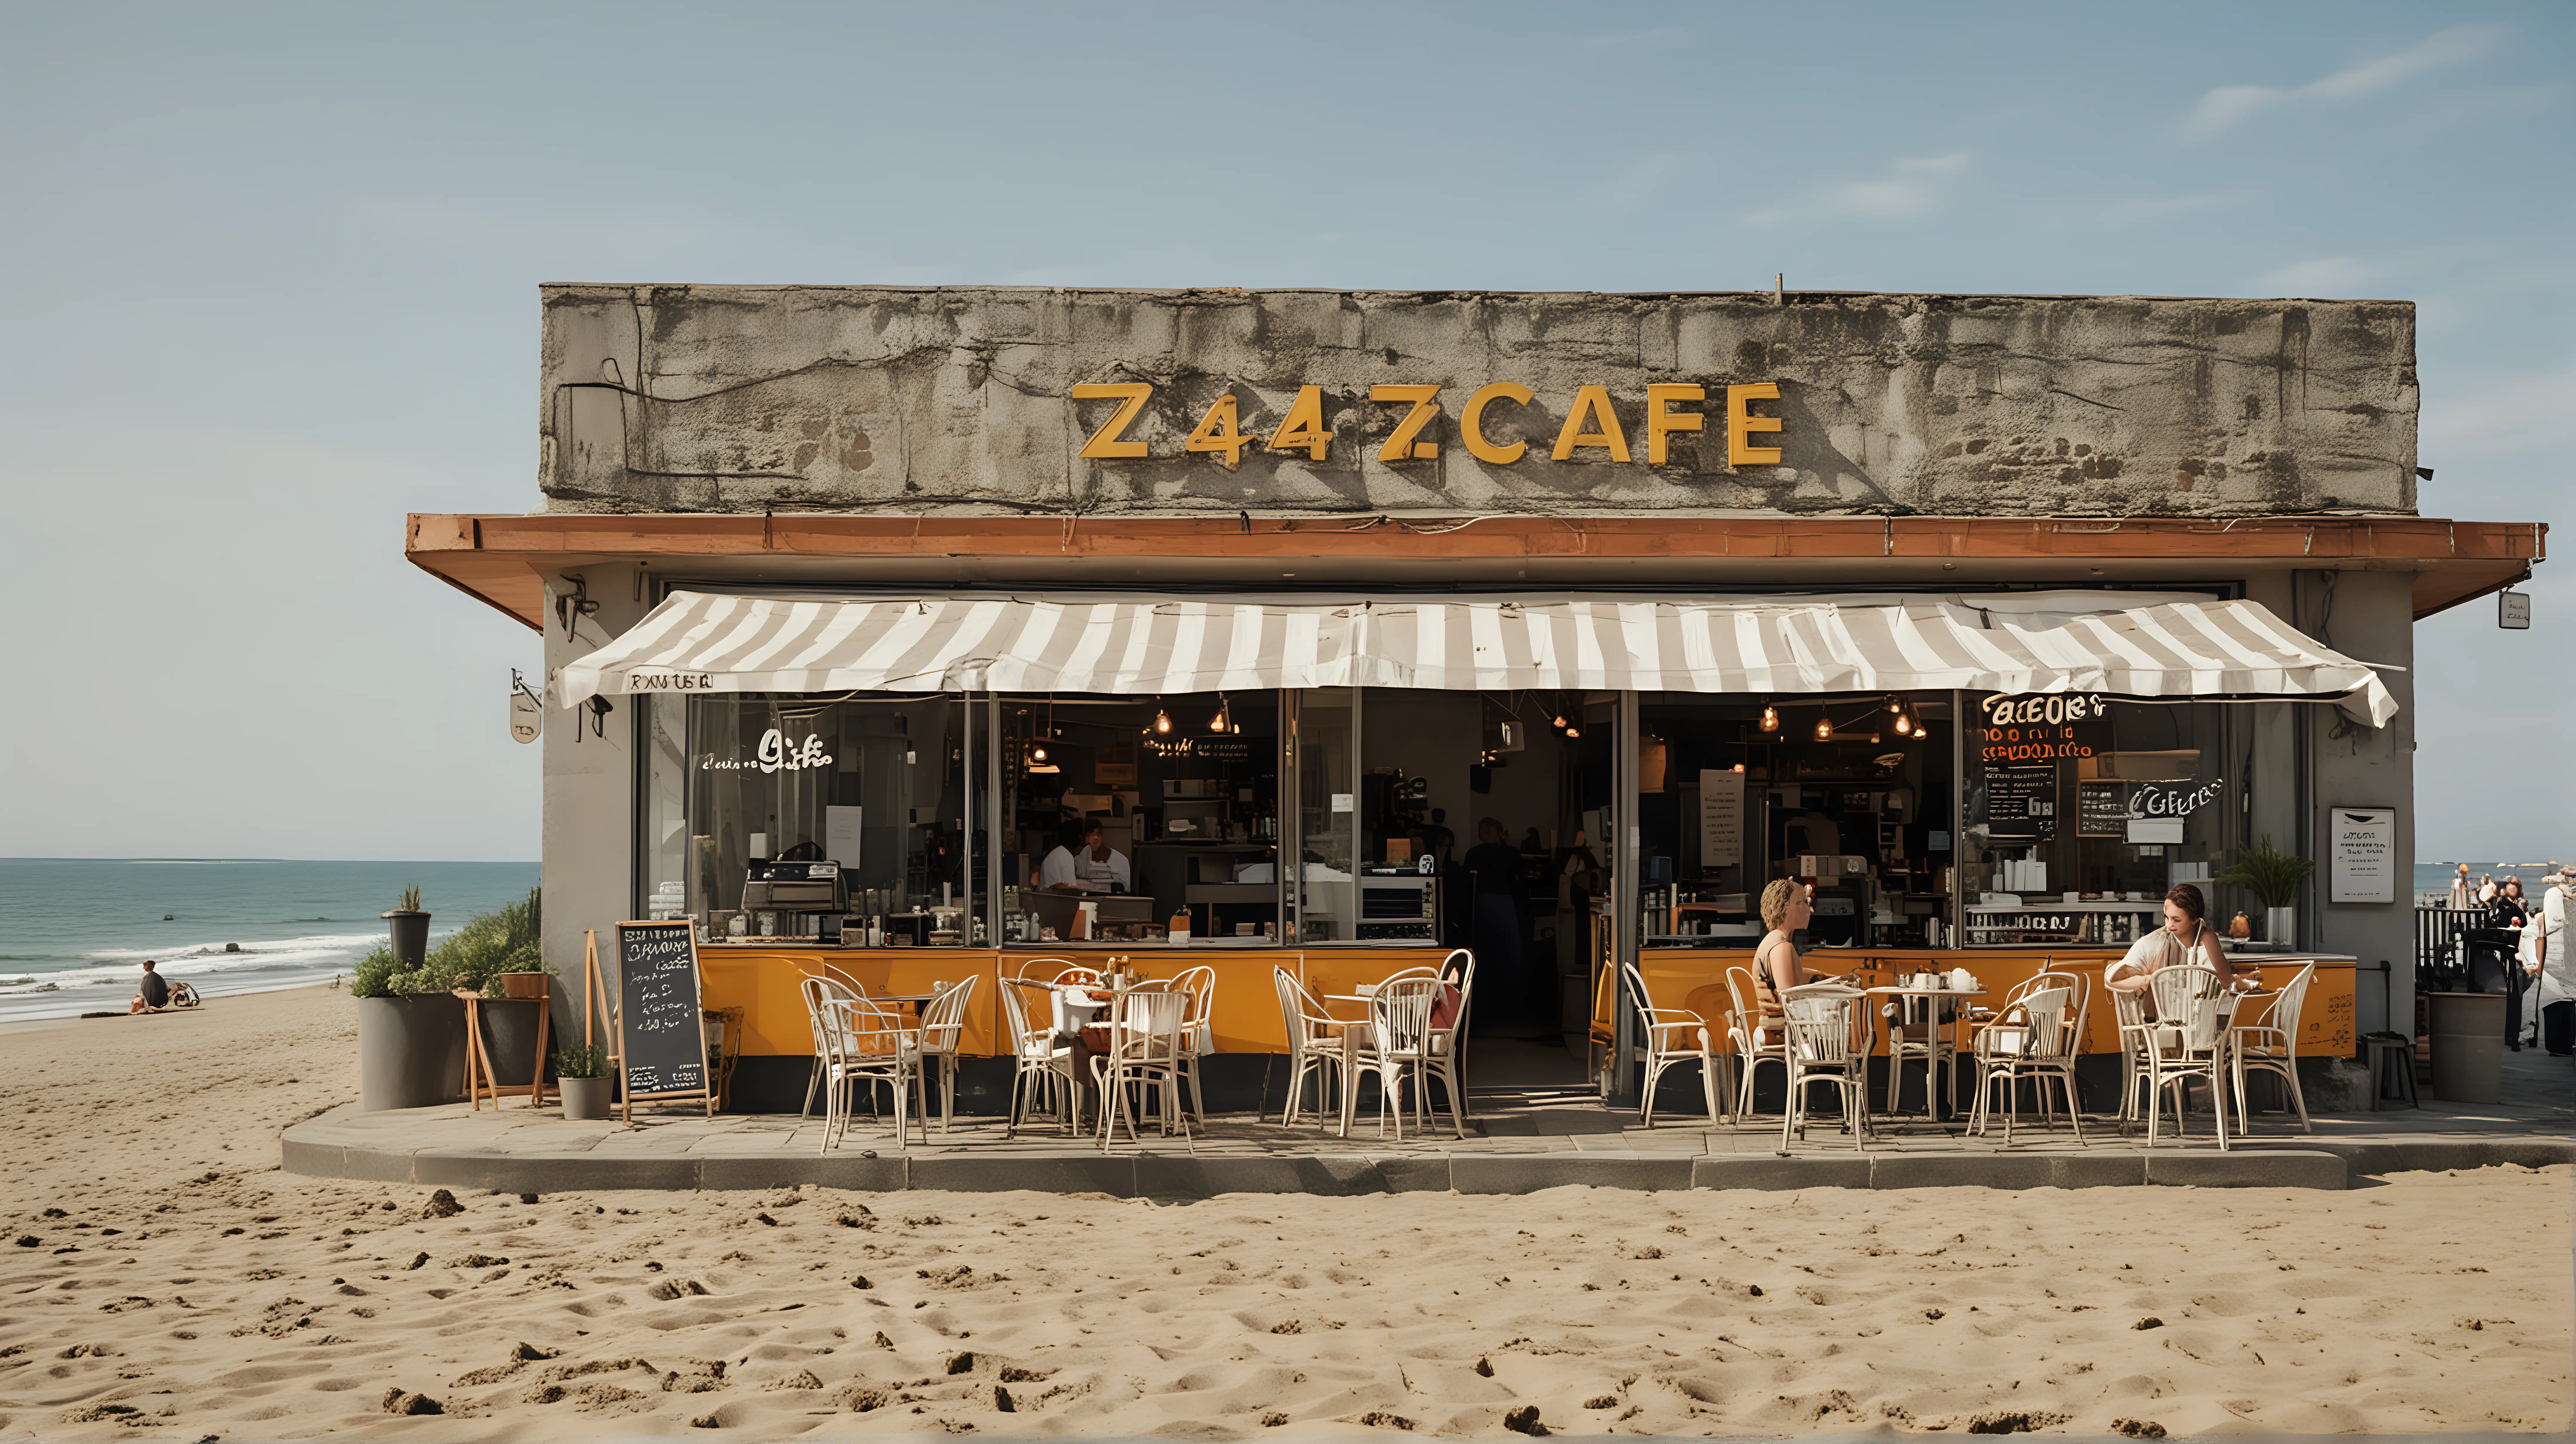 A small modern looking European cafe on it's own on a beach, exterior view, "Z-4 Cafe" written on the banner, small group of people and a barista are by the cafe